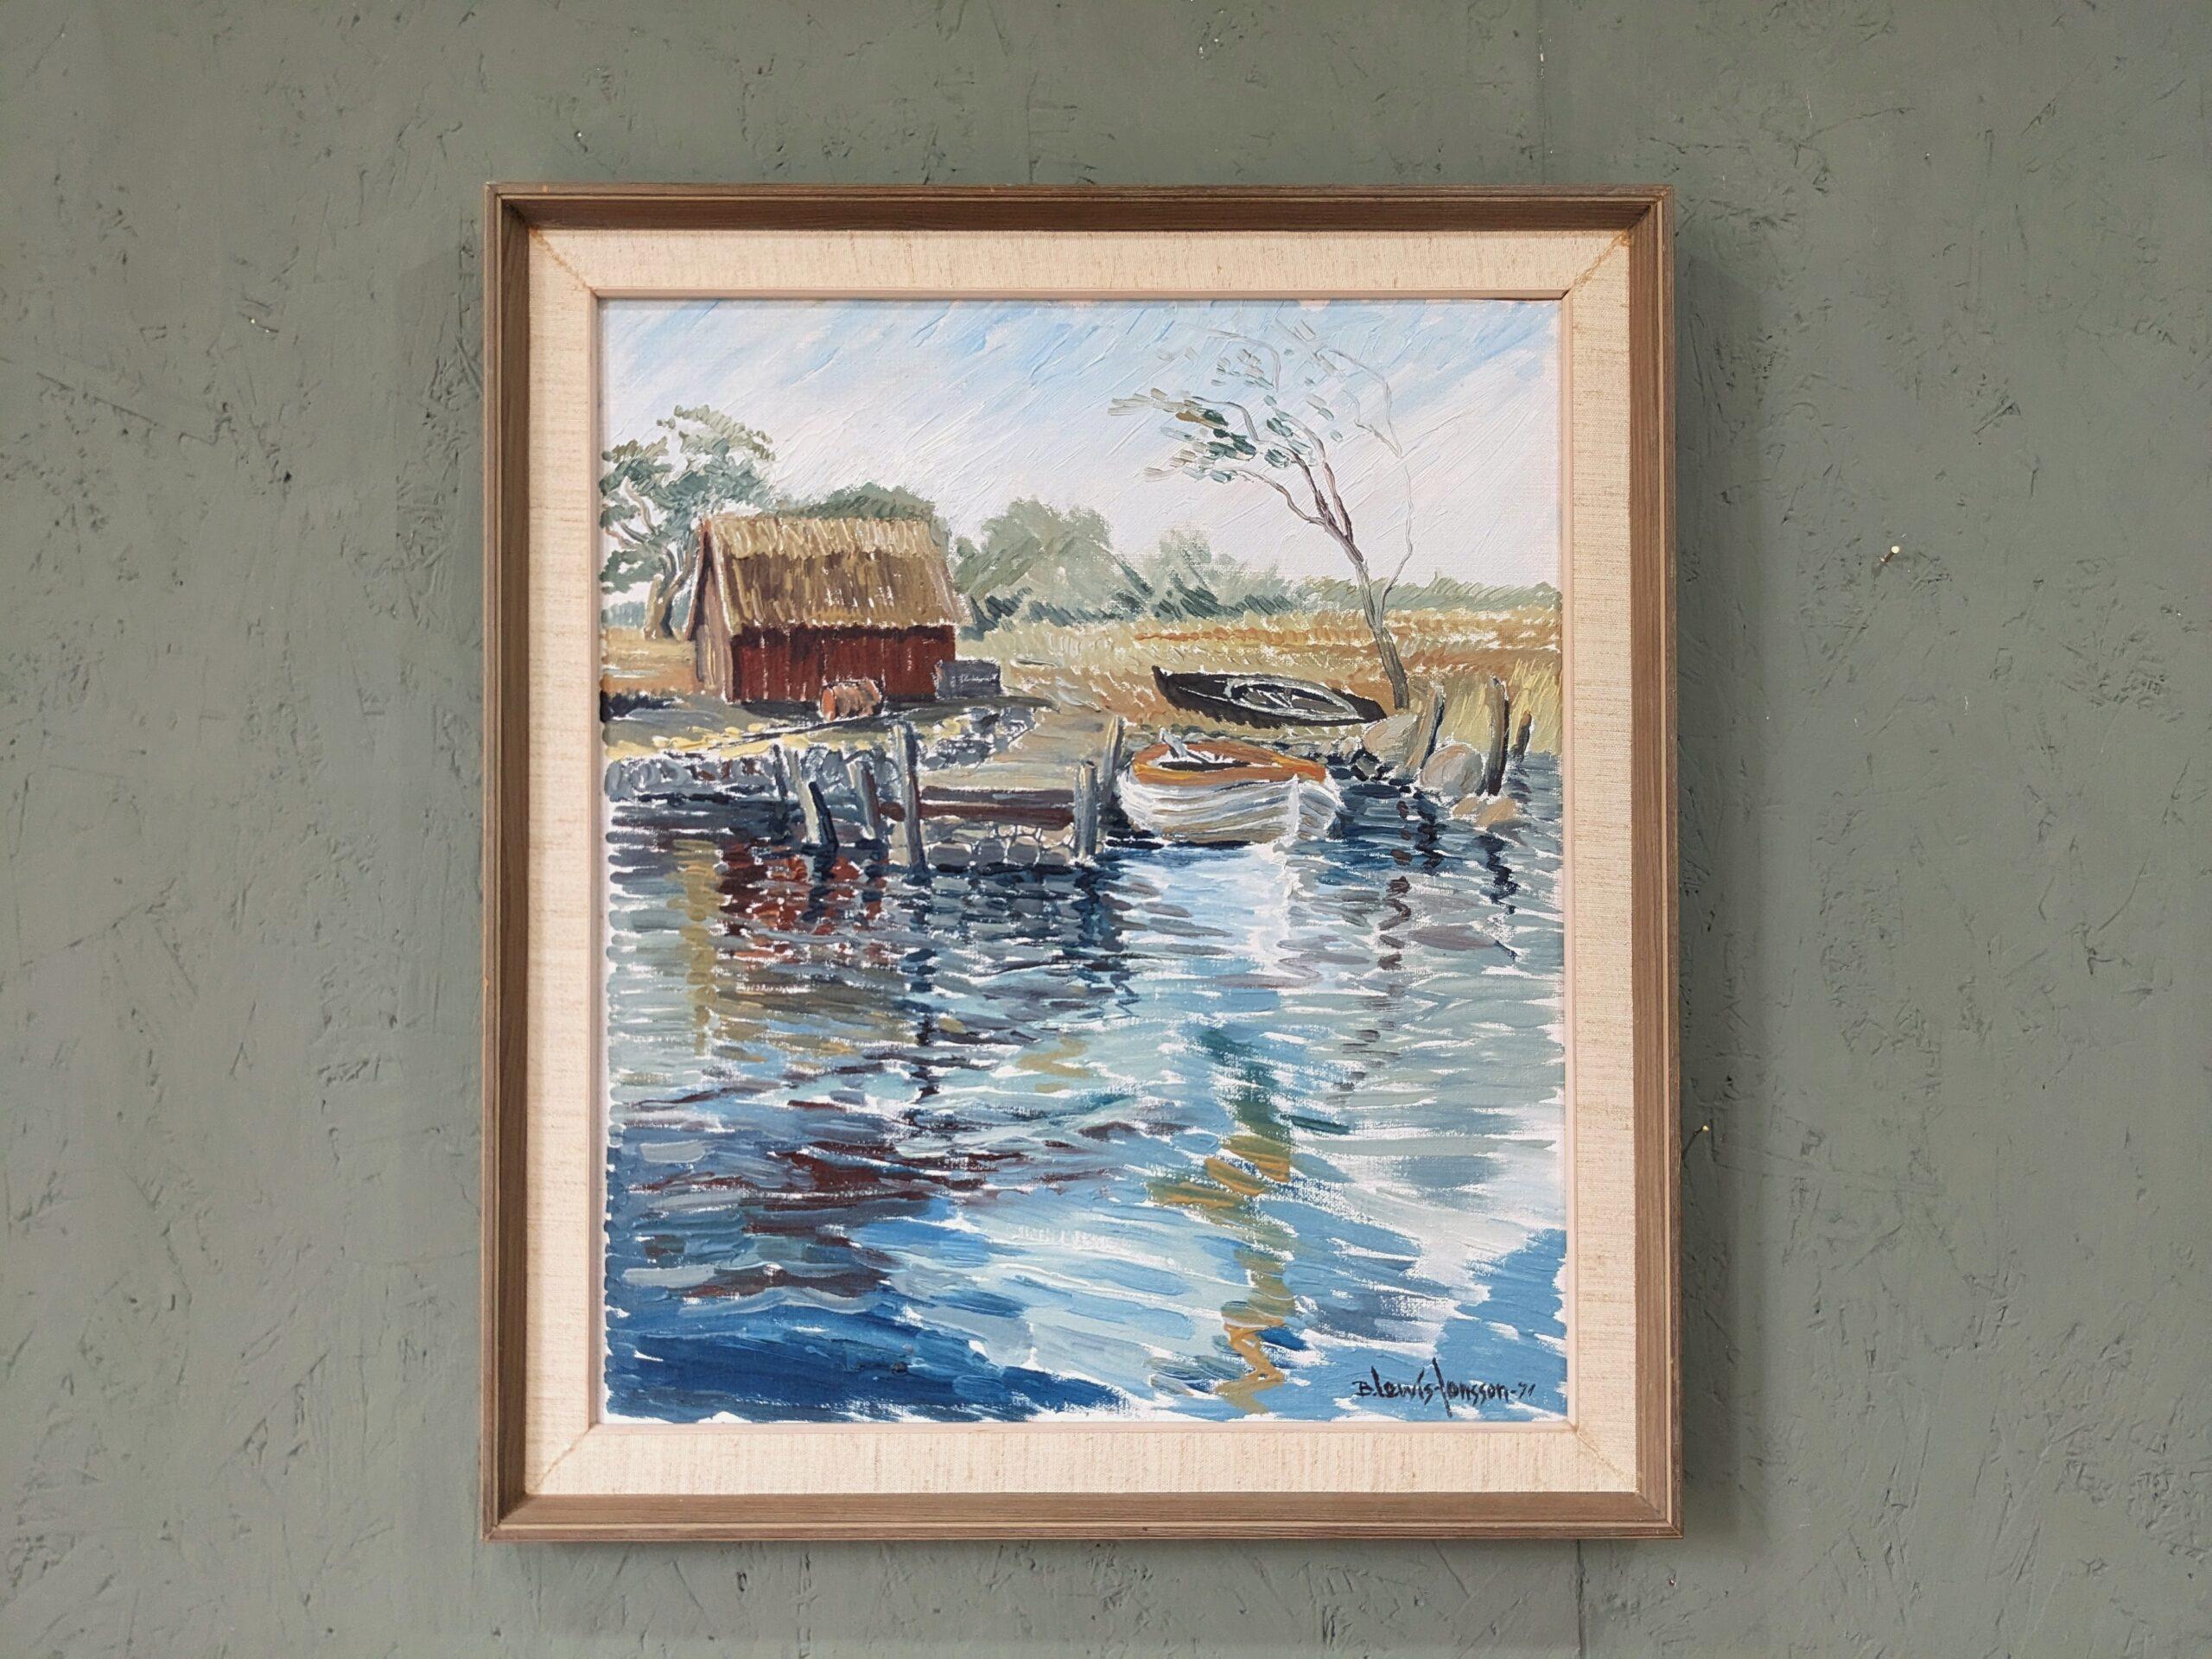 BOATHOUSE
Size:  54 x 48 cm (including frame)
Oil on canvas

A soothing and restful modernist style river landscape composition, executed in oil and dated 1971.

The composition presents a boat shed situated in lush greenery, and resting by a river